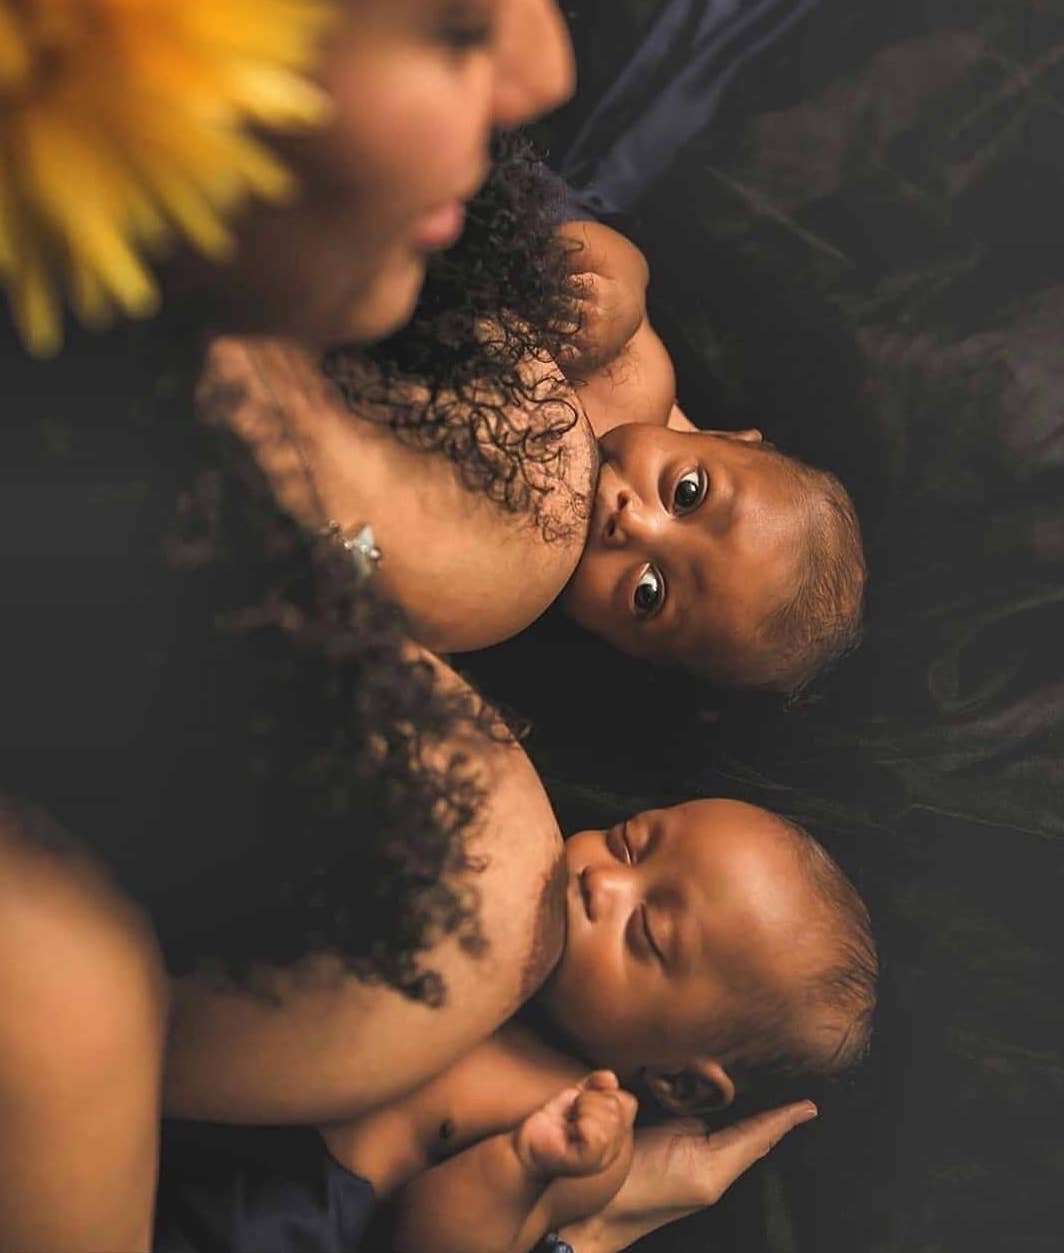 Expert Tips for a Smooth Breastfeeding Journey with Twins: Essential Guide  for Nursing Mothers — A Modern Lifestyle, Beauty & Motherhood Blog